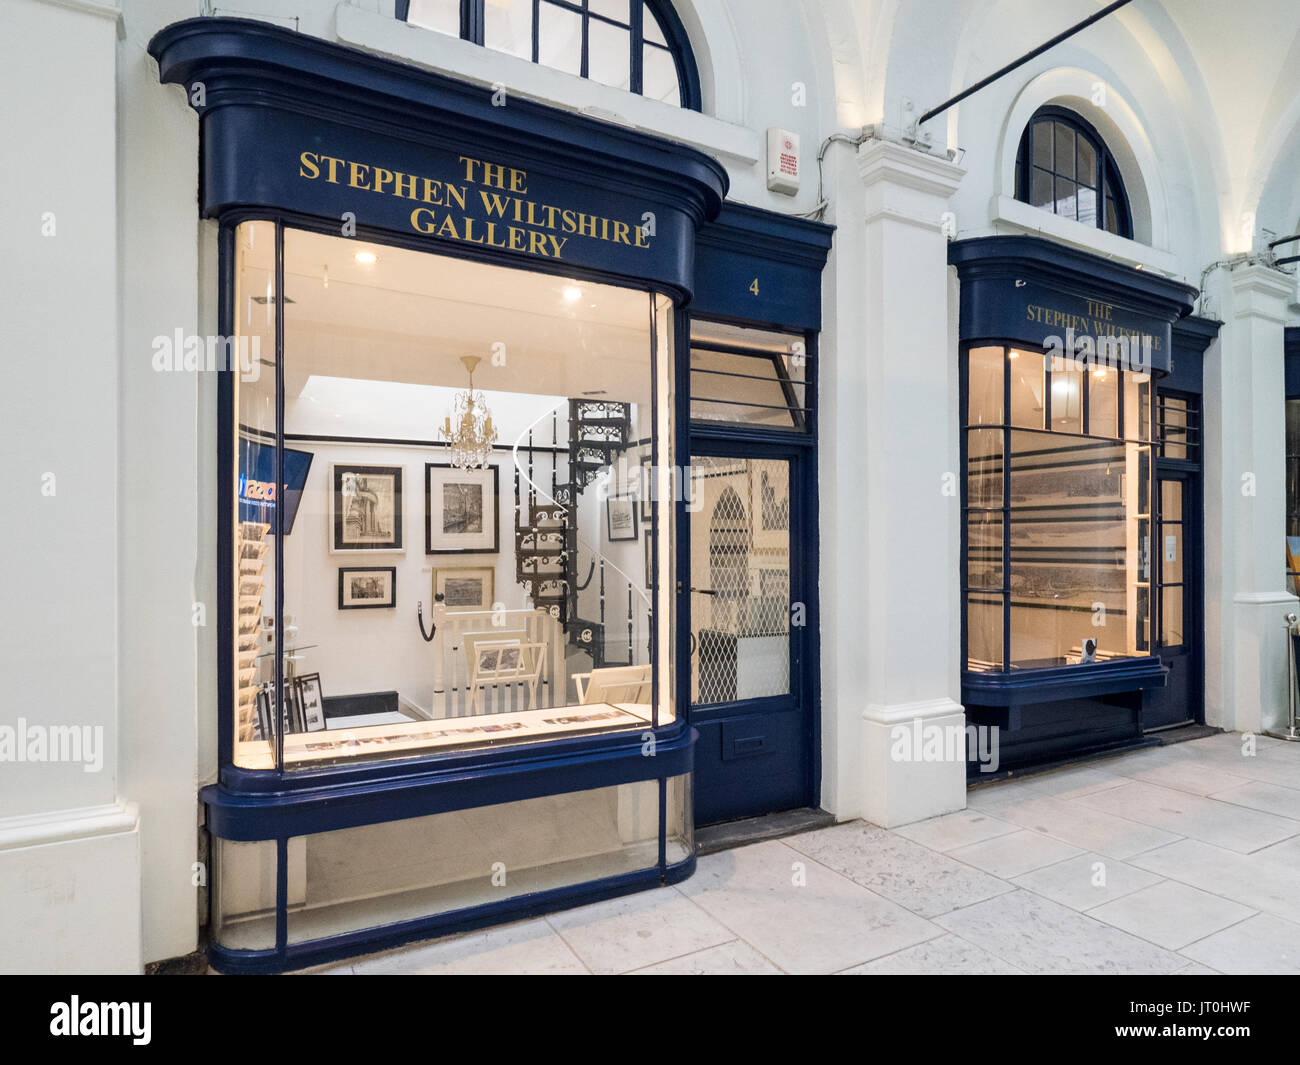 The Stephen Wiltshire Gallery in Royal Opera Arcade, St. James's, London, UK. Stephen is well known for his detailed cityscape drawings. Stock Photo